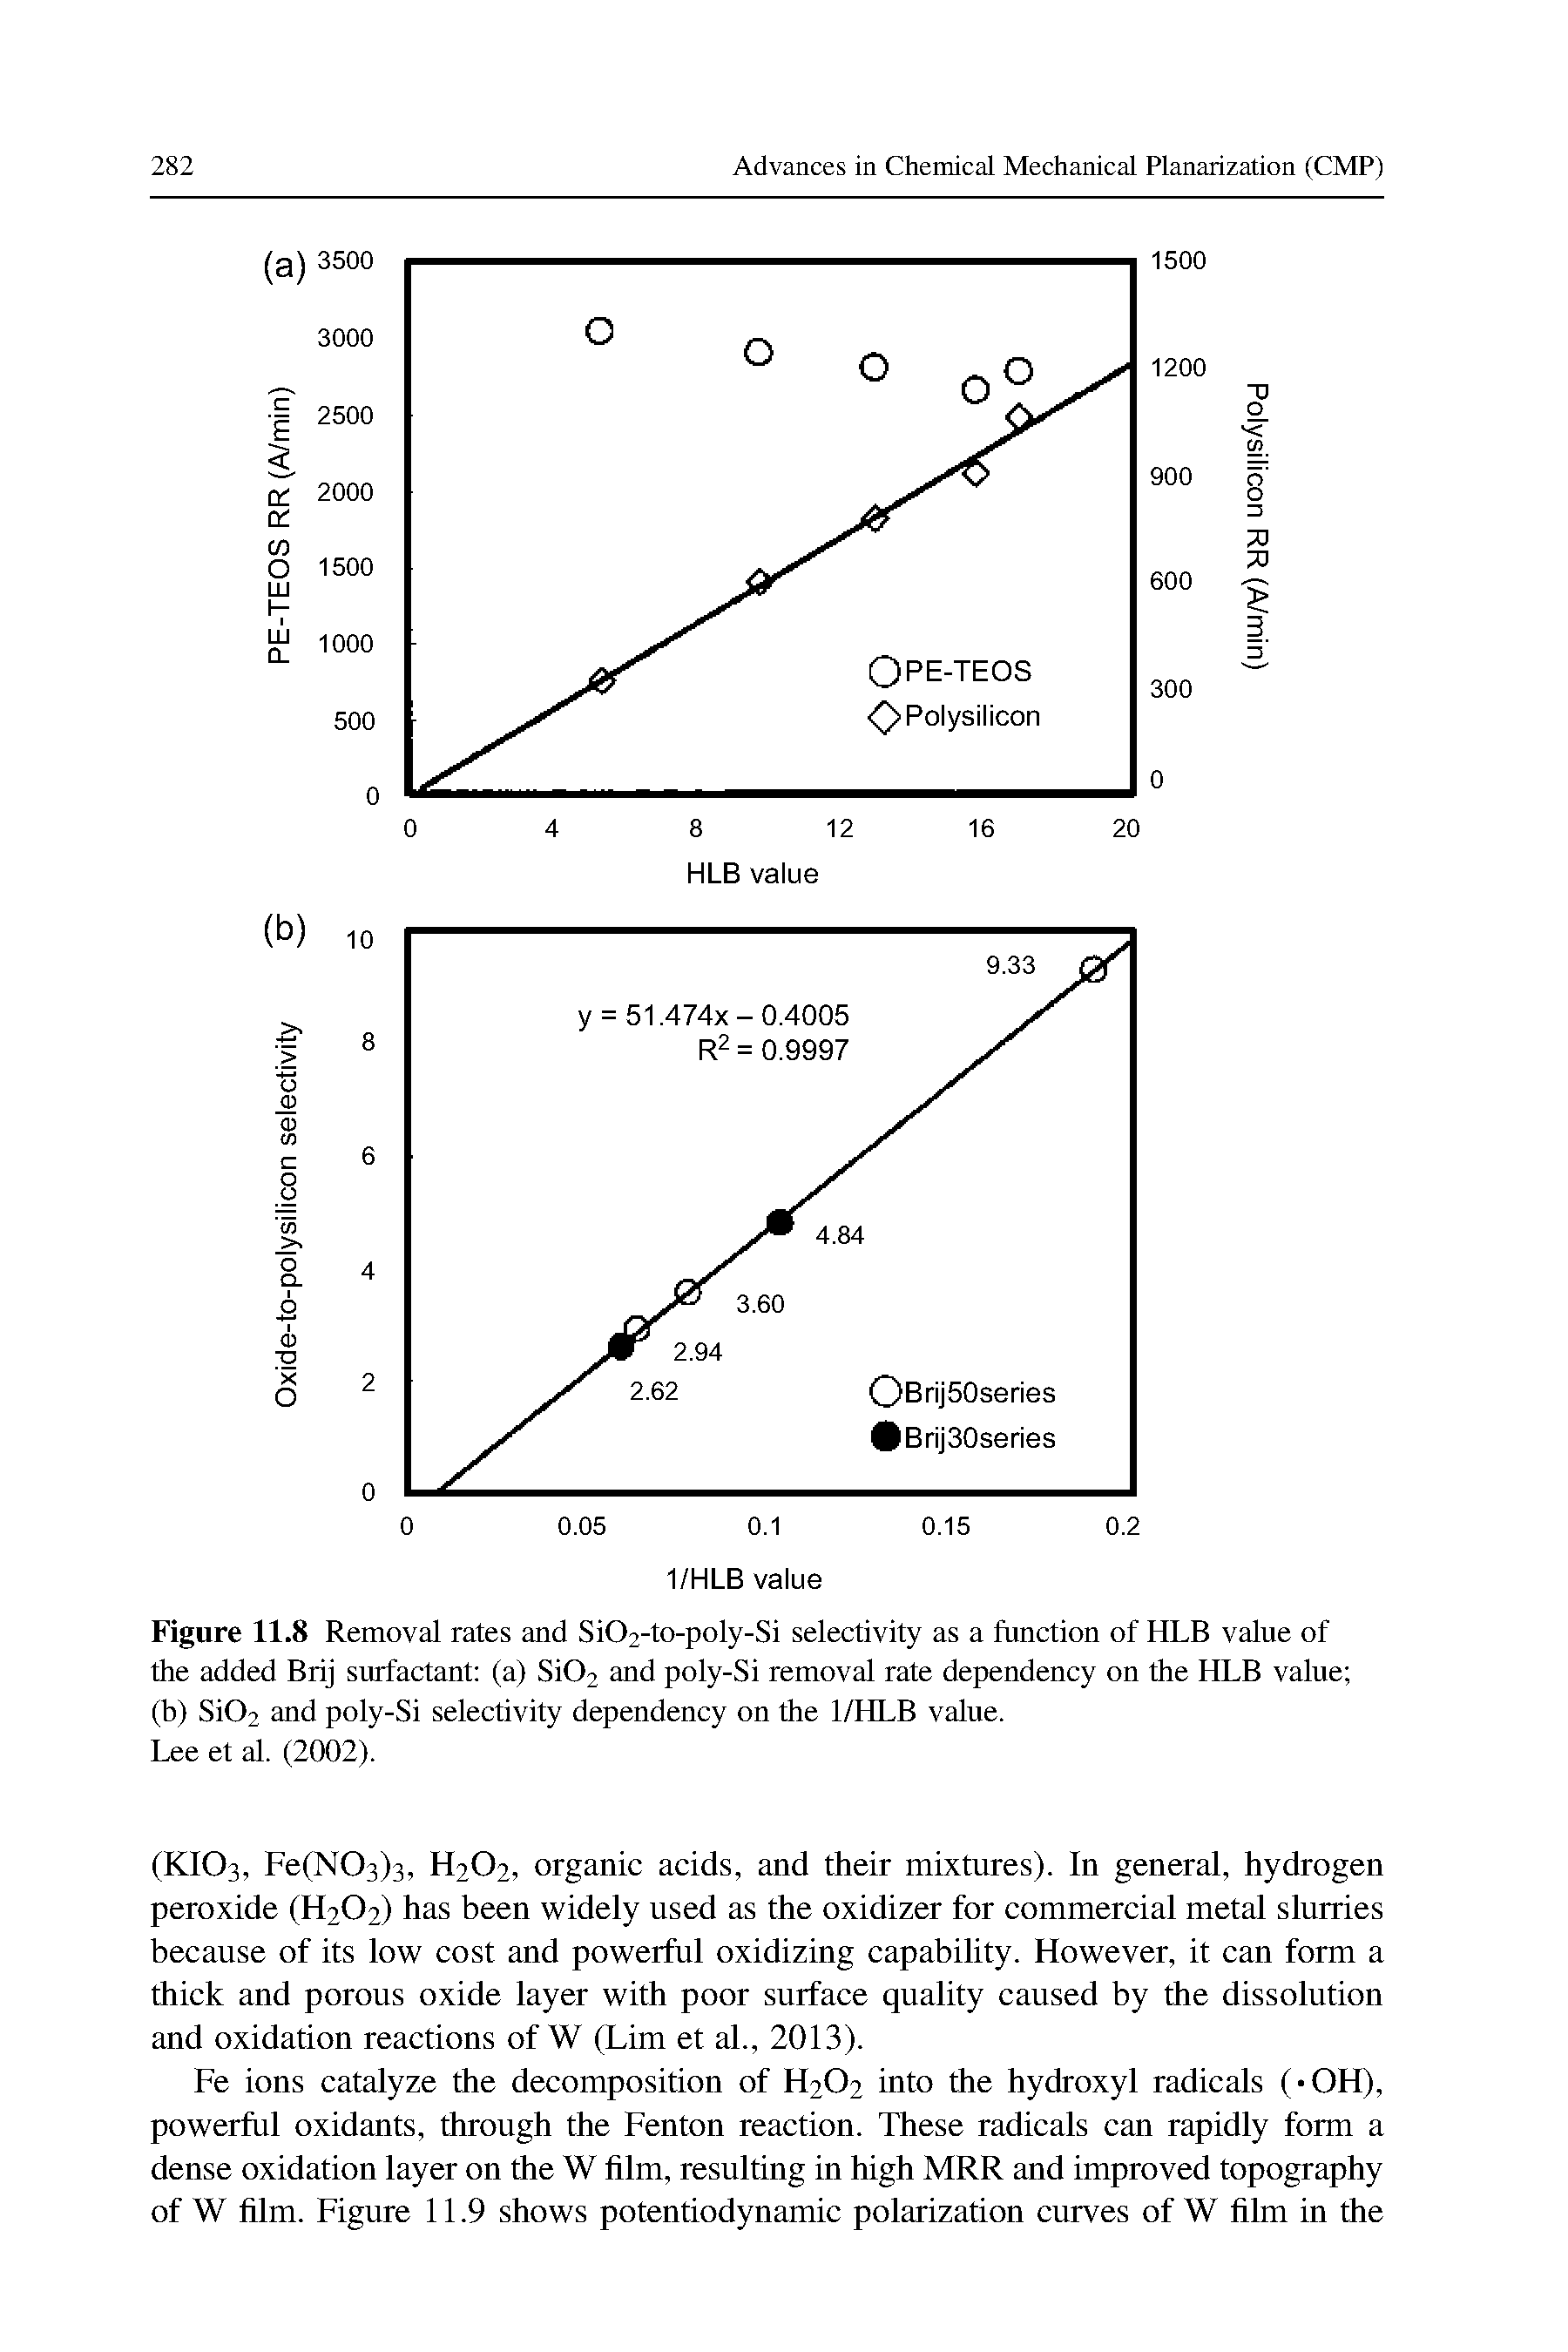 Figure 11.8 Removal rates and Si02-to-poly-Si selectivity as a function of HLB value of the added Brij surfactant (a) Si02 and poly-Si removal rate dependency on the HLB value (b) Si02 and poly-Si selectivity dependency on the 1/HLB value.